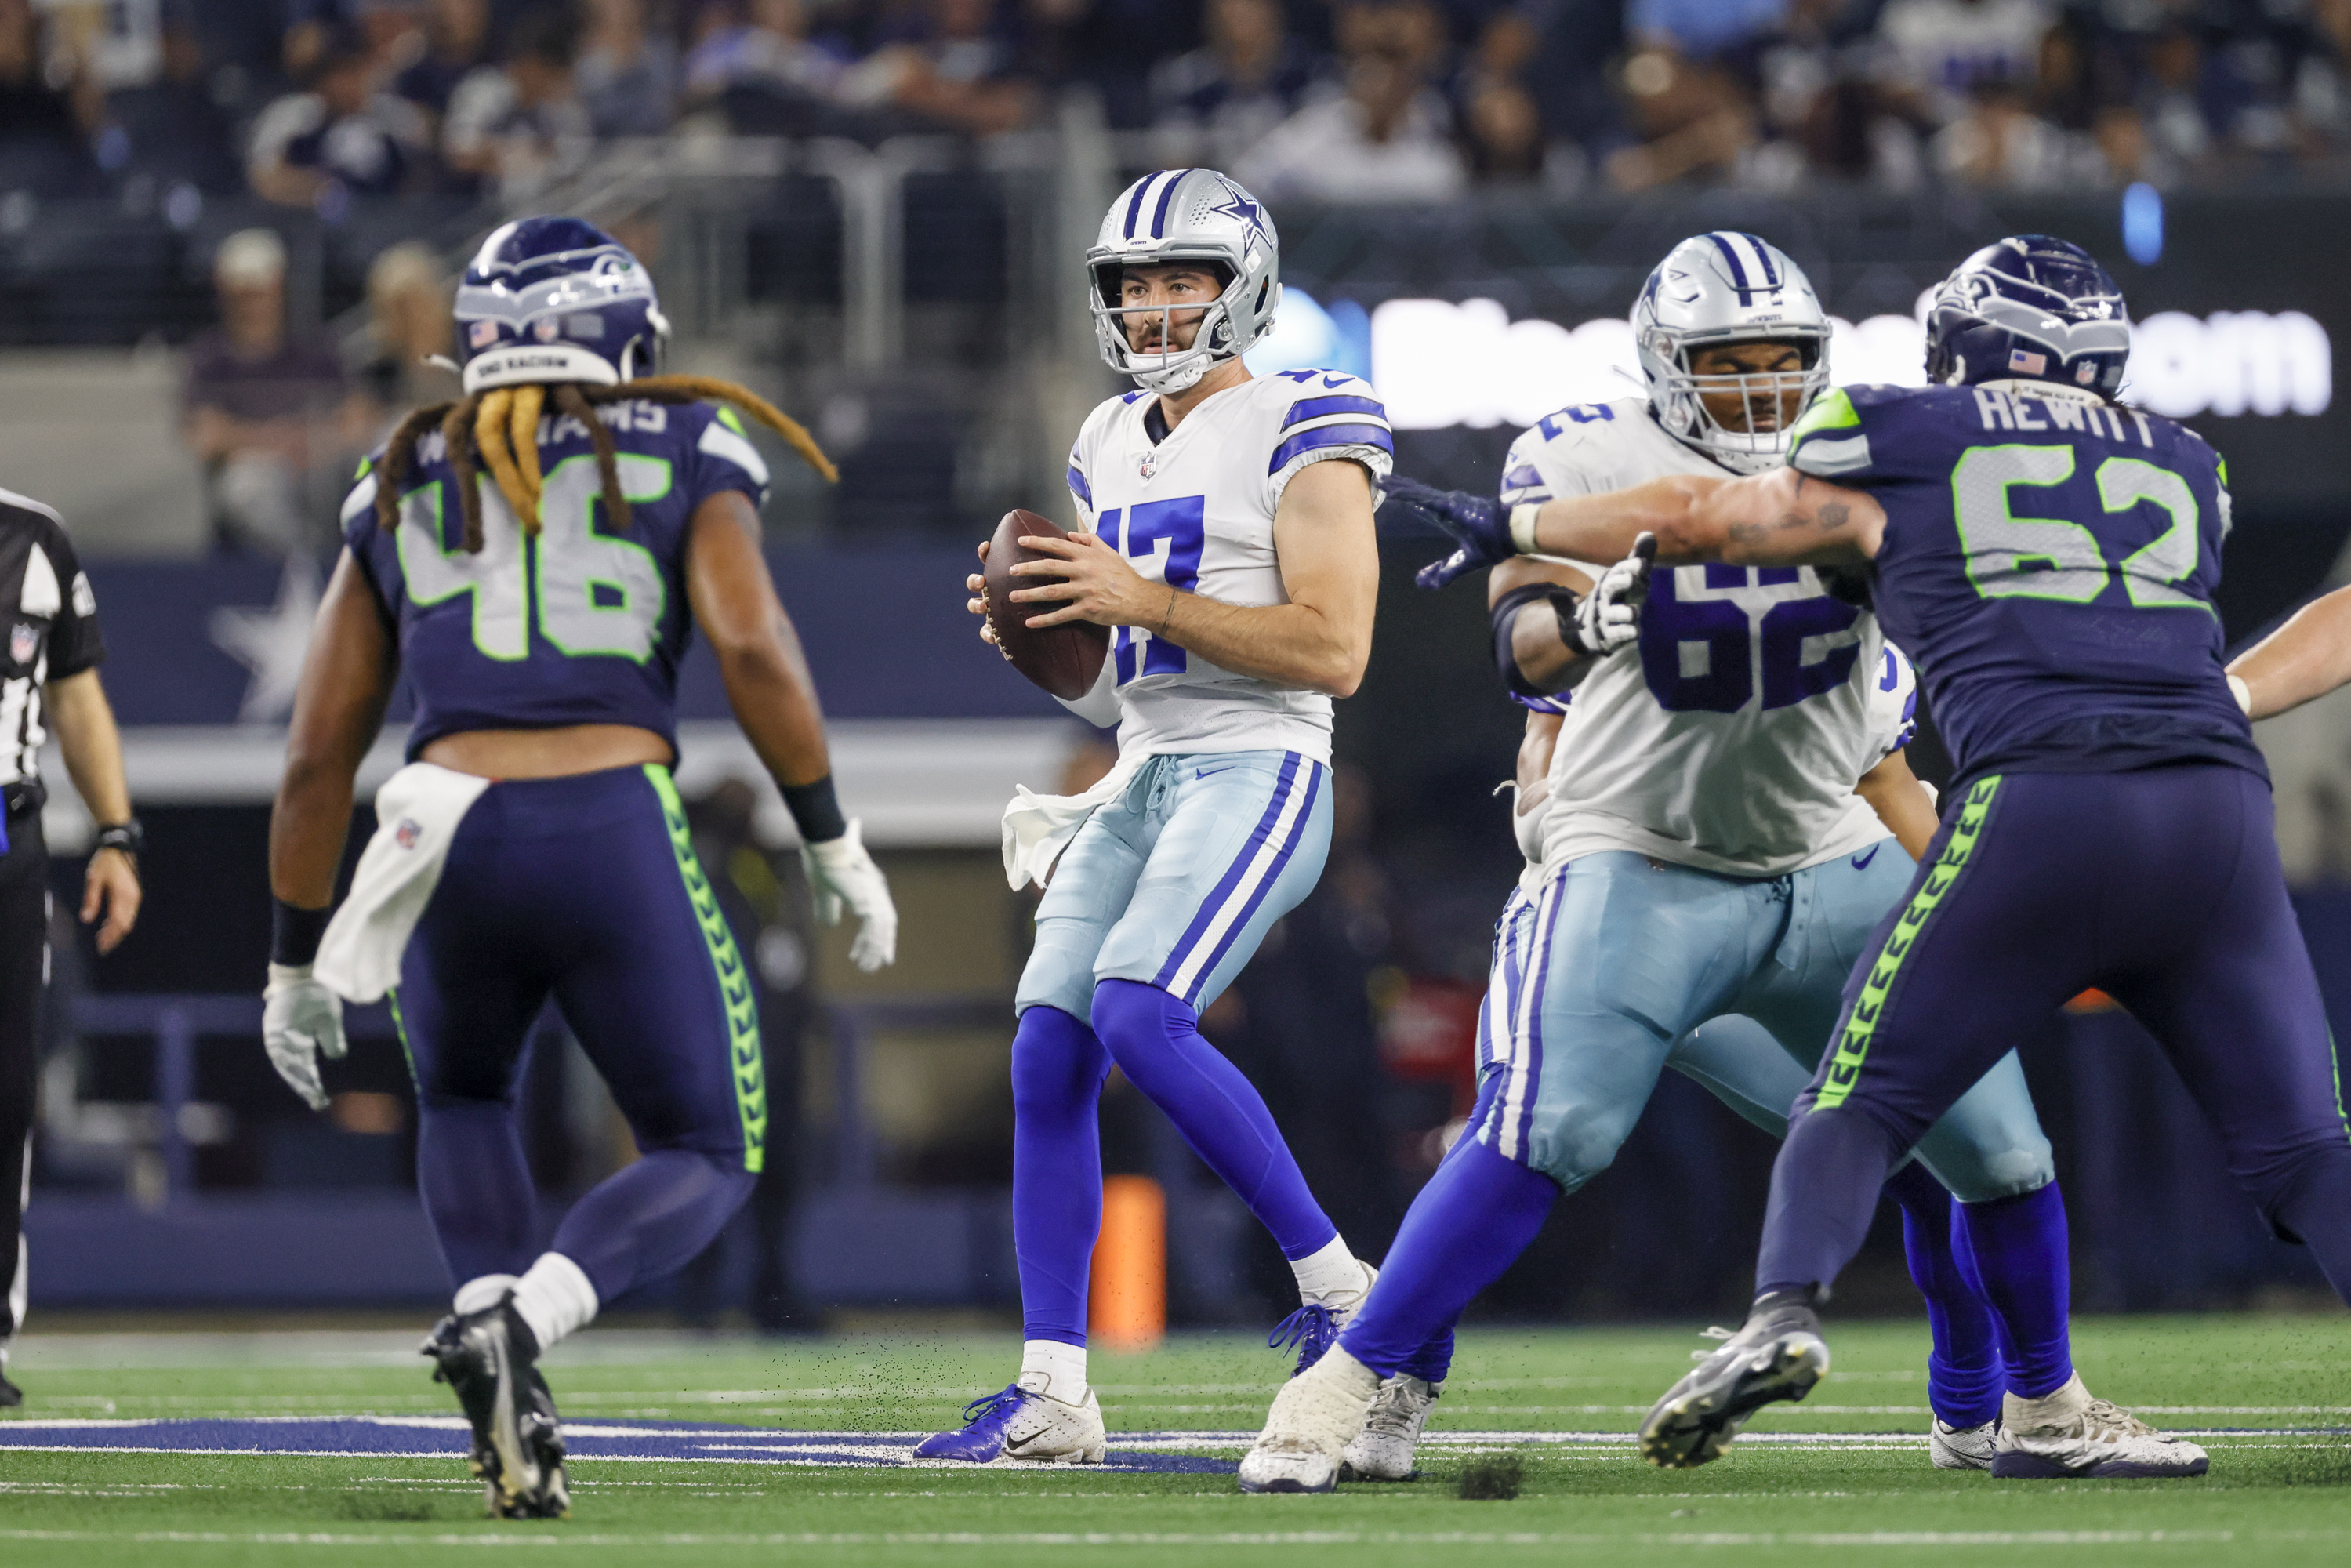 Dallas Cowboys quarterback Ben DiNucci looks for an open receiver downfield during the game between the Dallas Cowboys and the Seattle Seahawks on August 26, 2022 at AT&amp;T Stadium in Arlington, Texas.